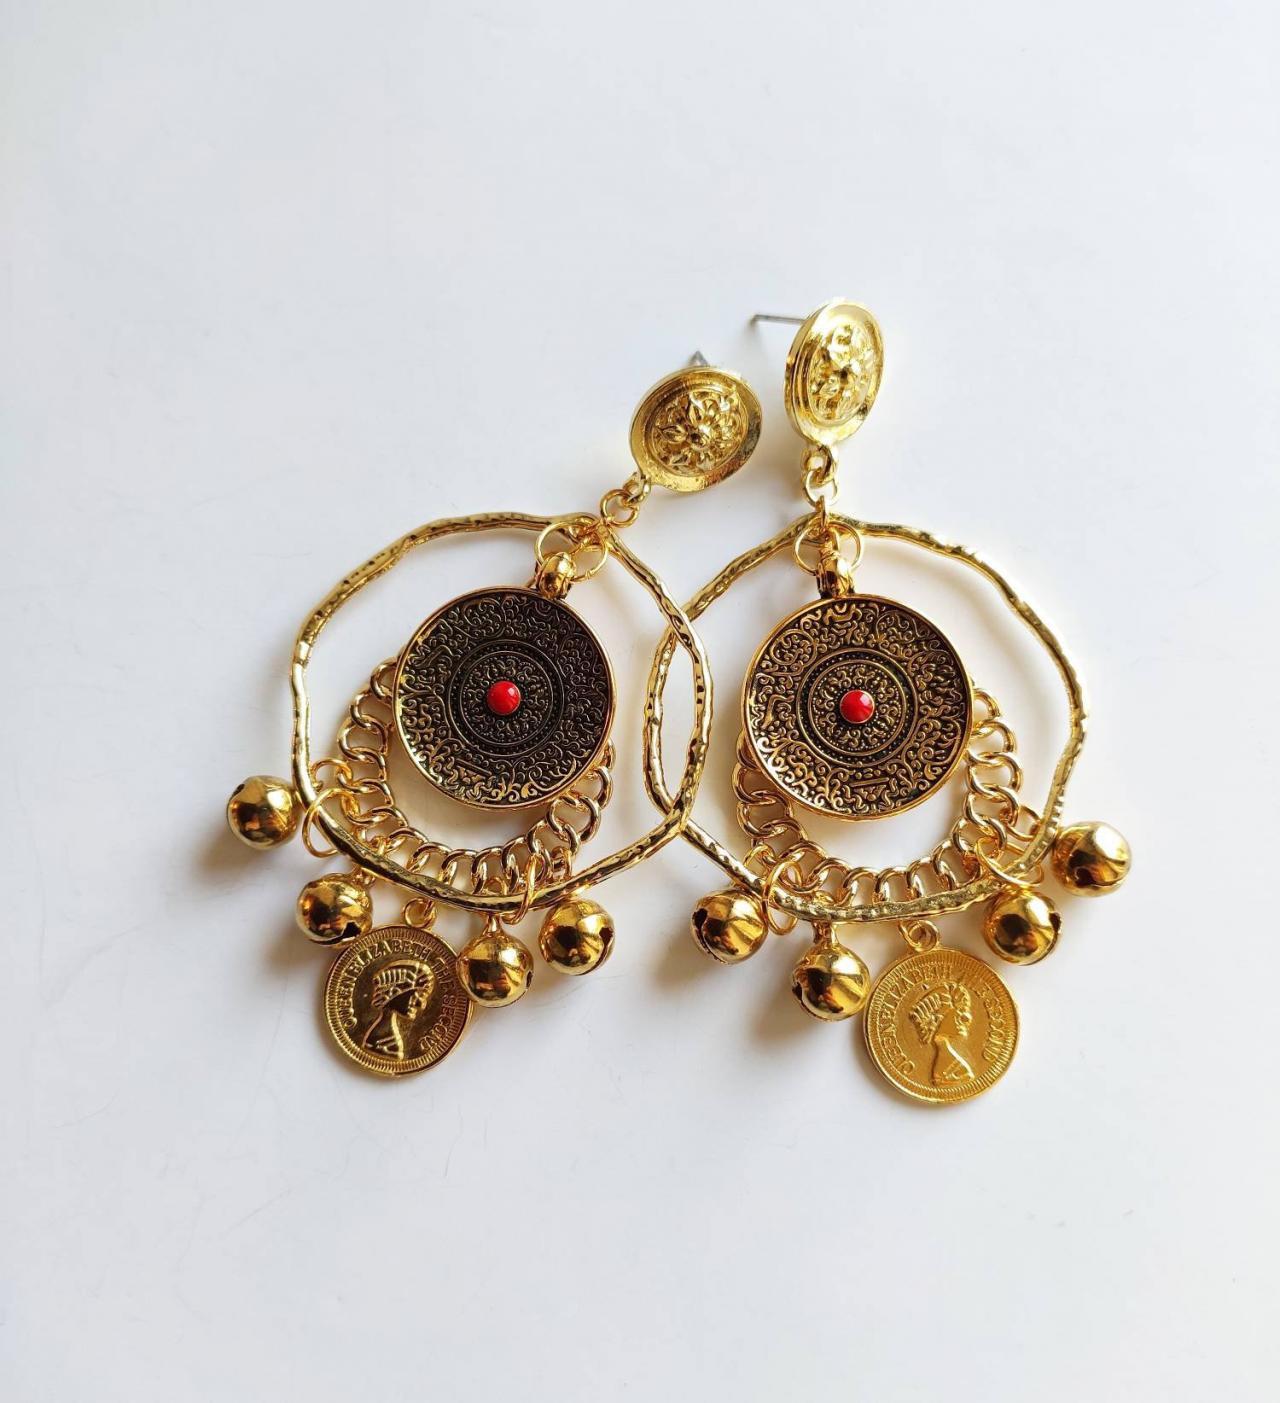 Brass Hoop Earrings With Red Stone Pendant Medallion, Bells And Lucky Mint